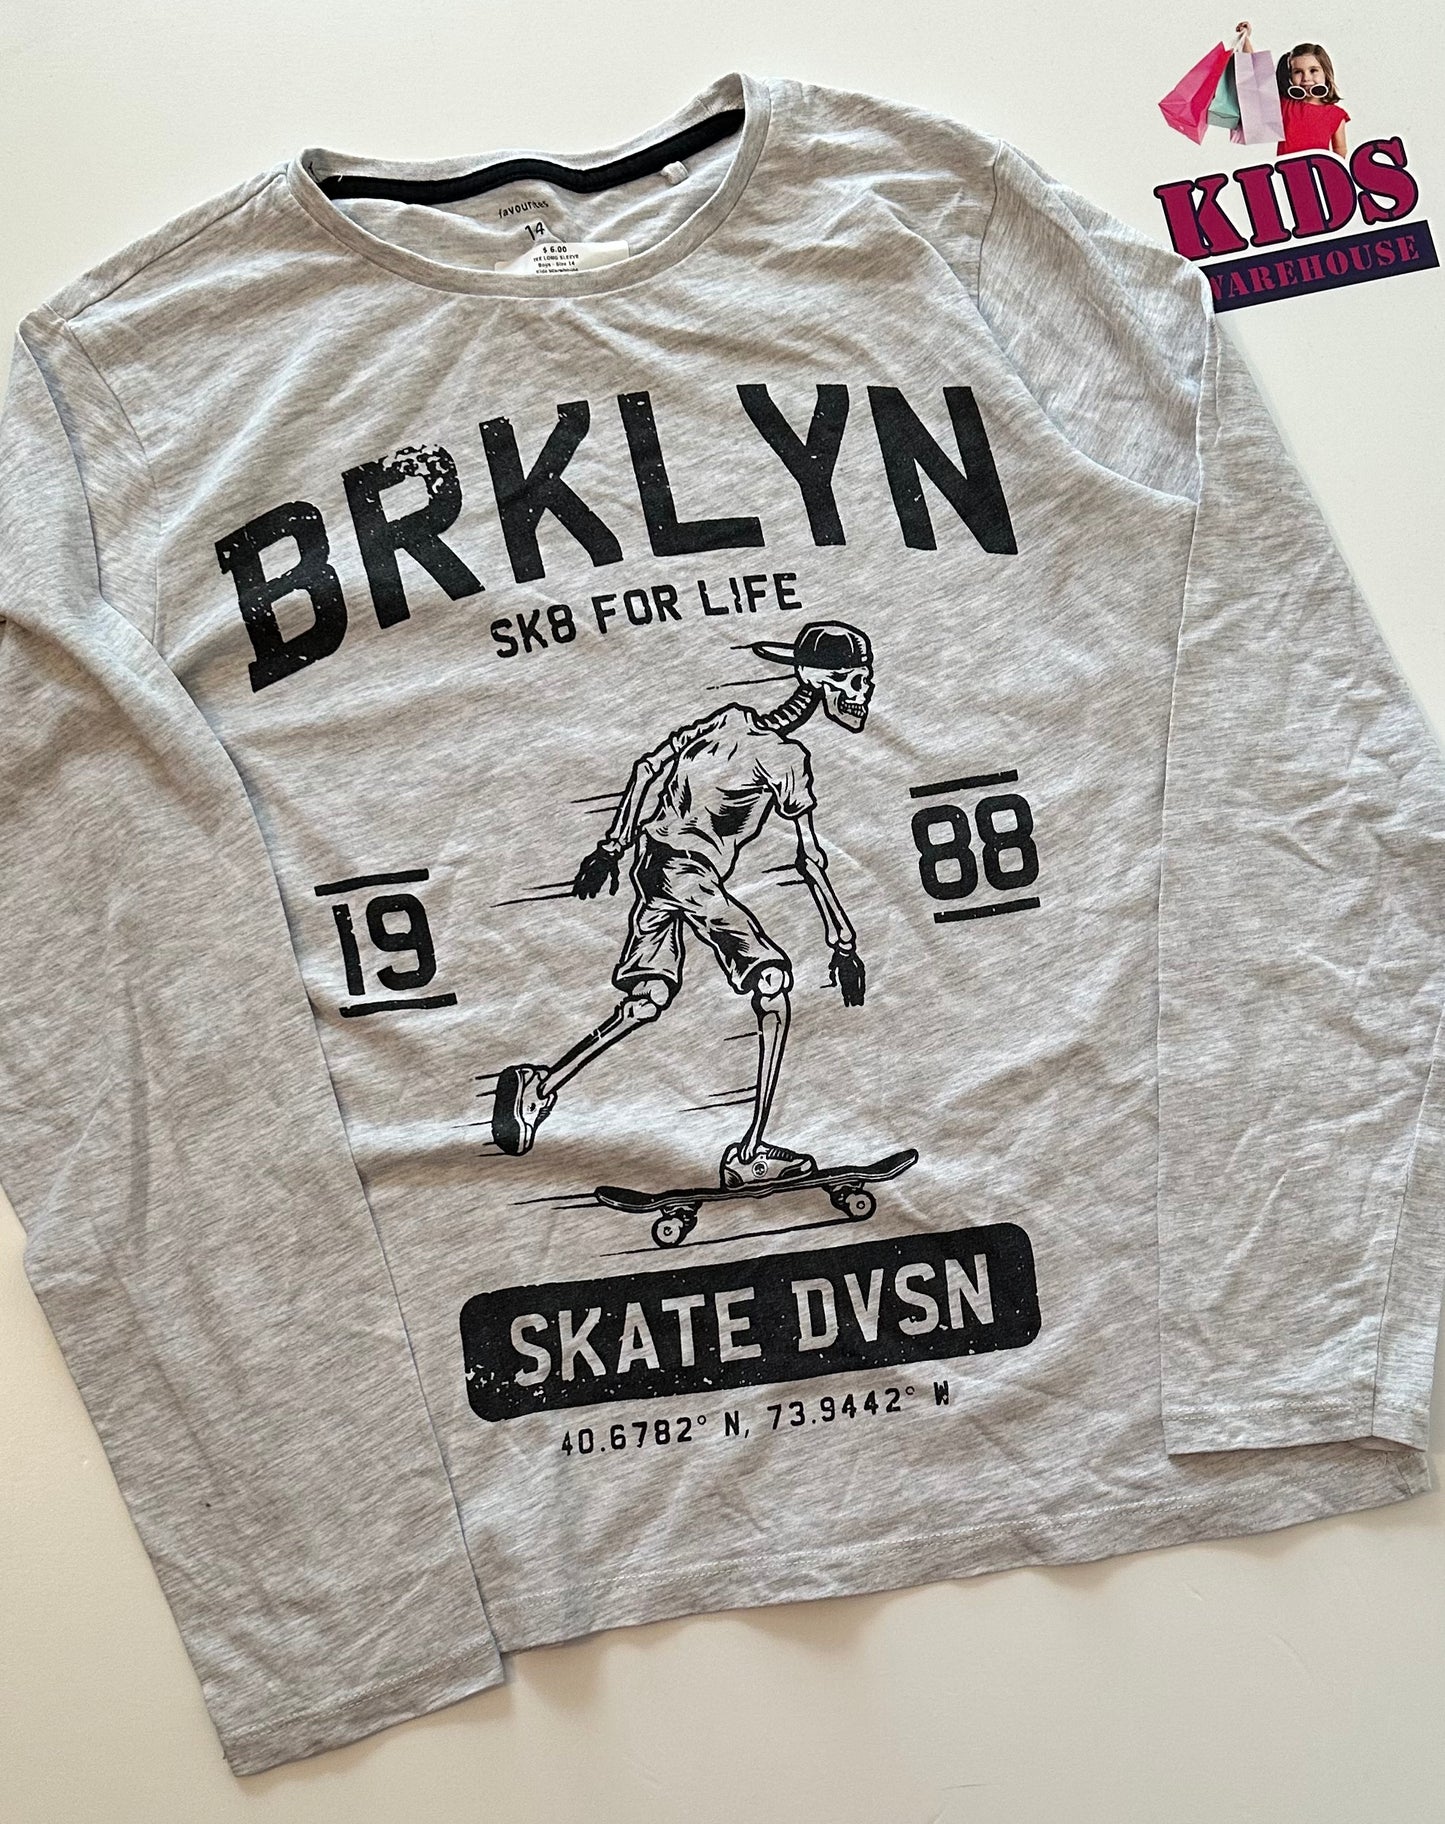 Brklyn Sk8 For Life Top Size 14